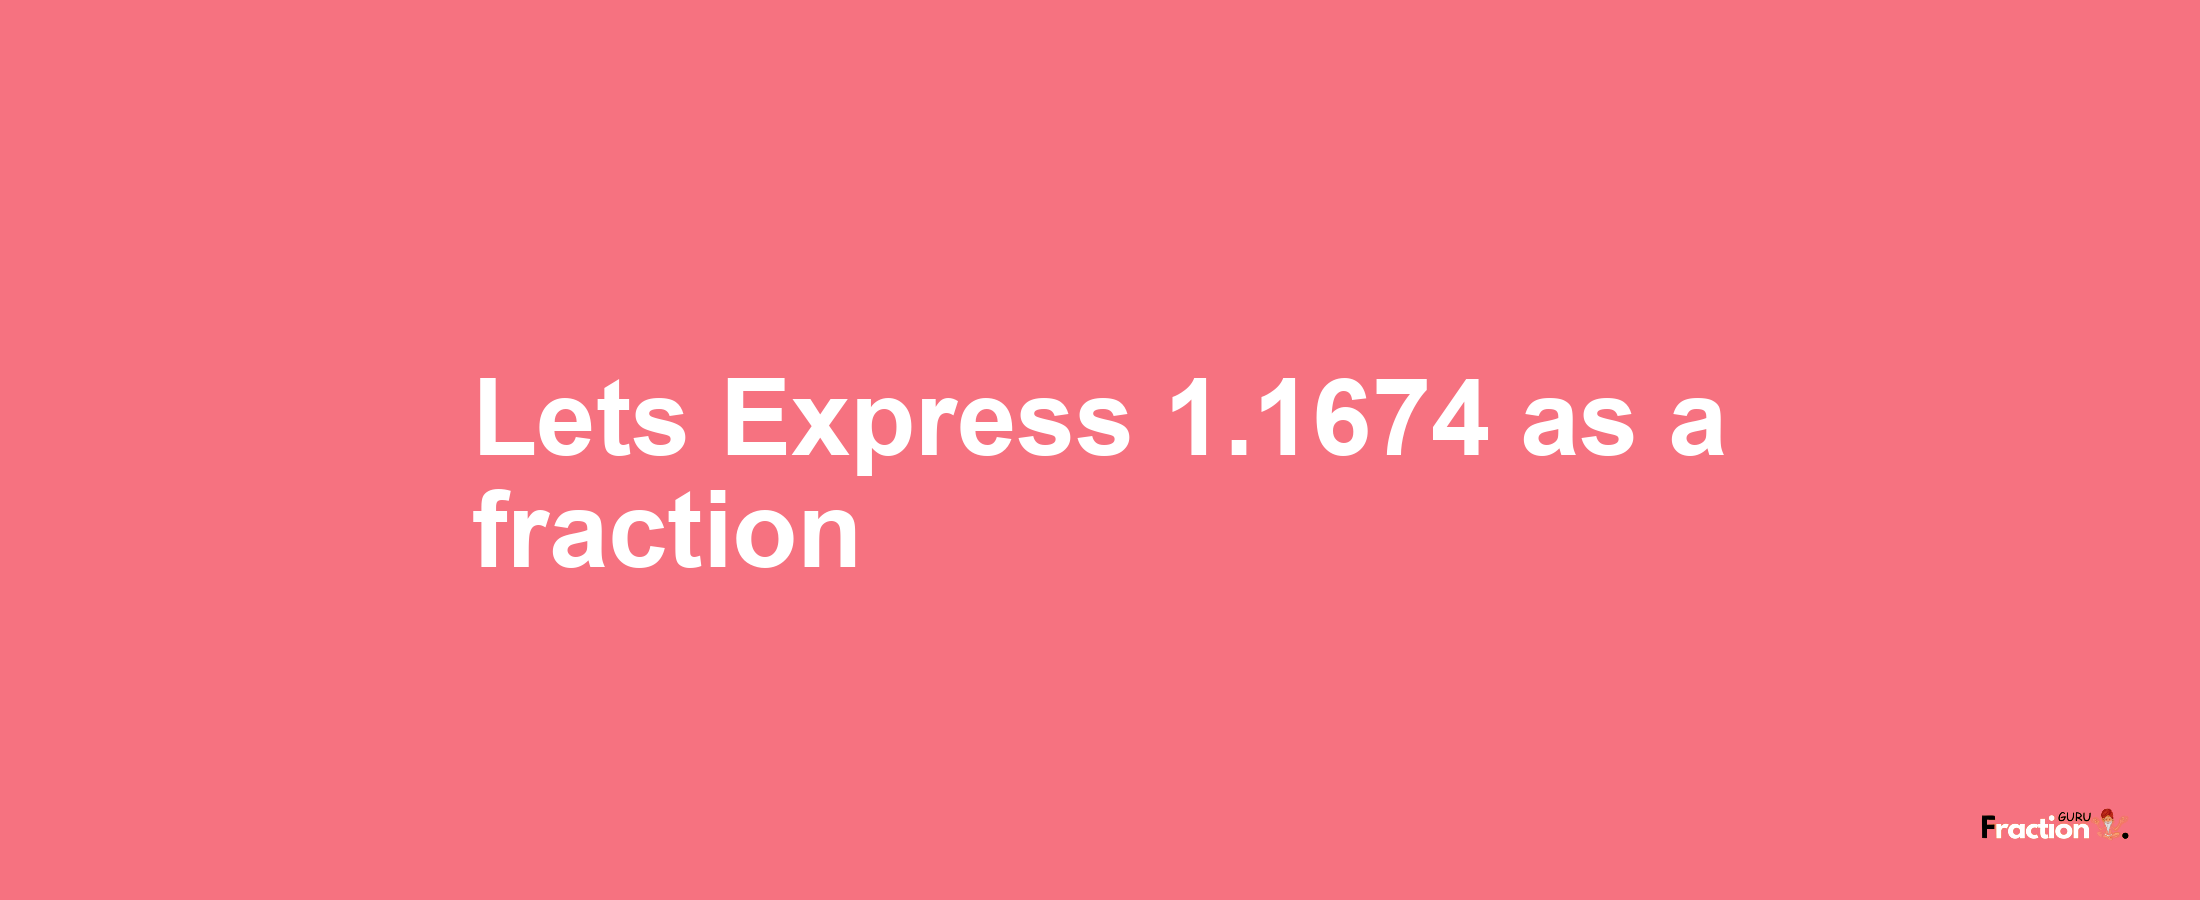 Lets Express 1.1674 as afraction